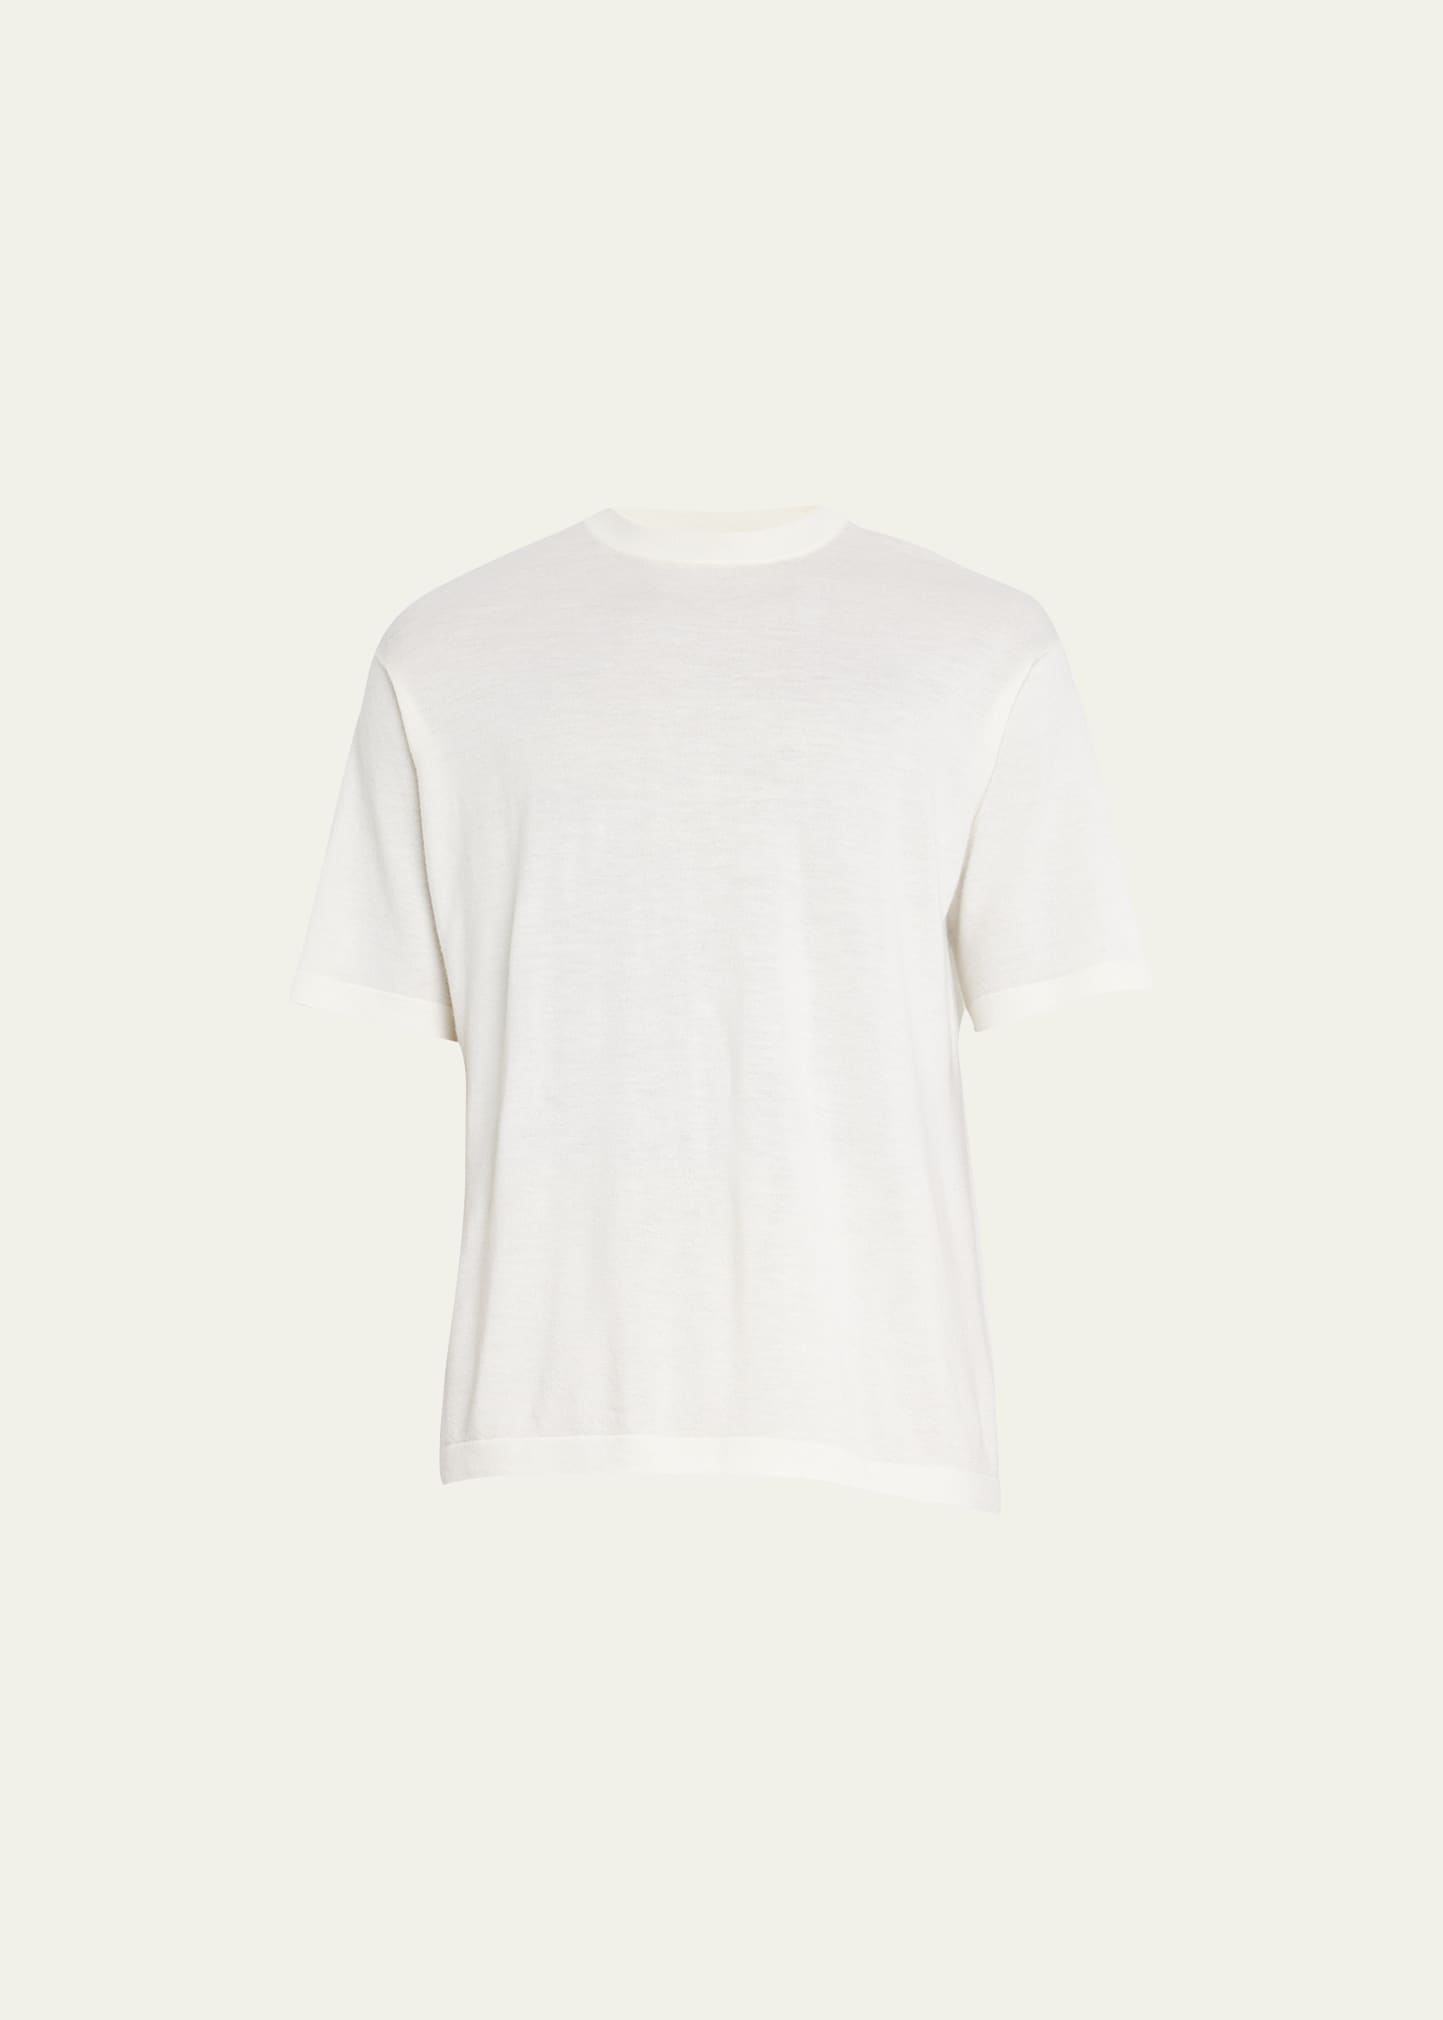 Lisa Yang Men's Ancell Cashmere T-shirt In Ivory